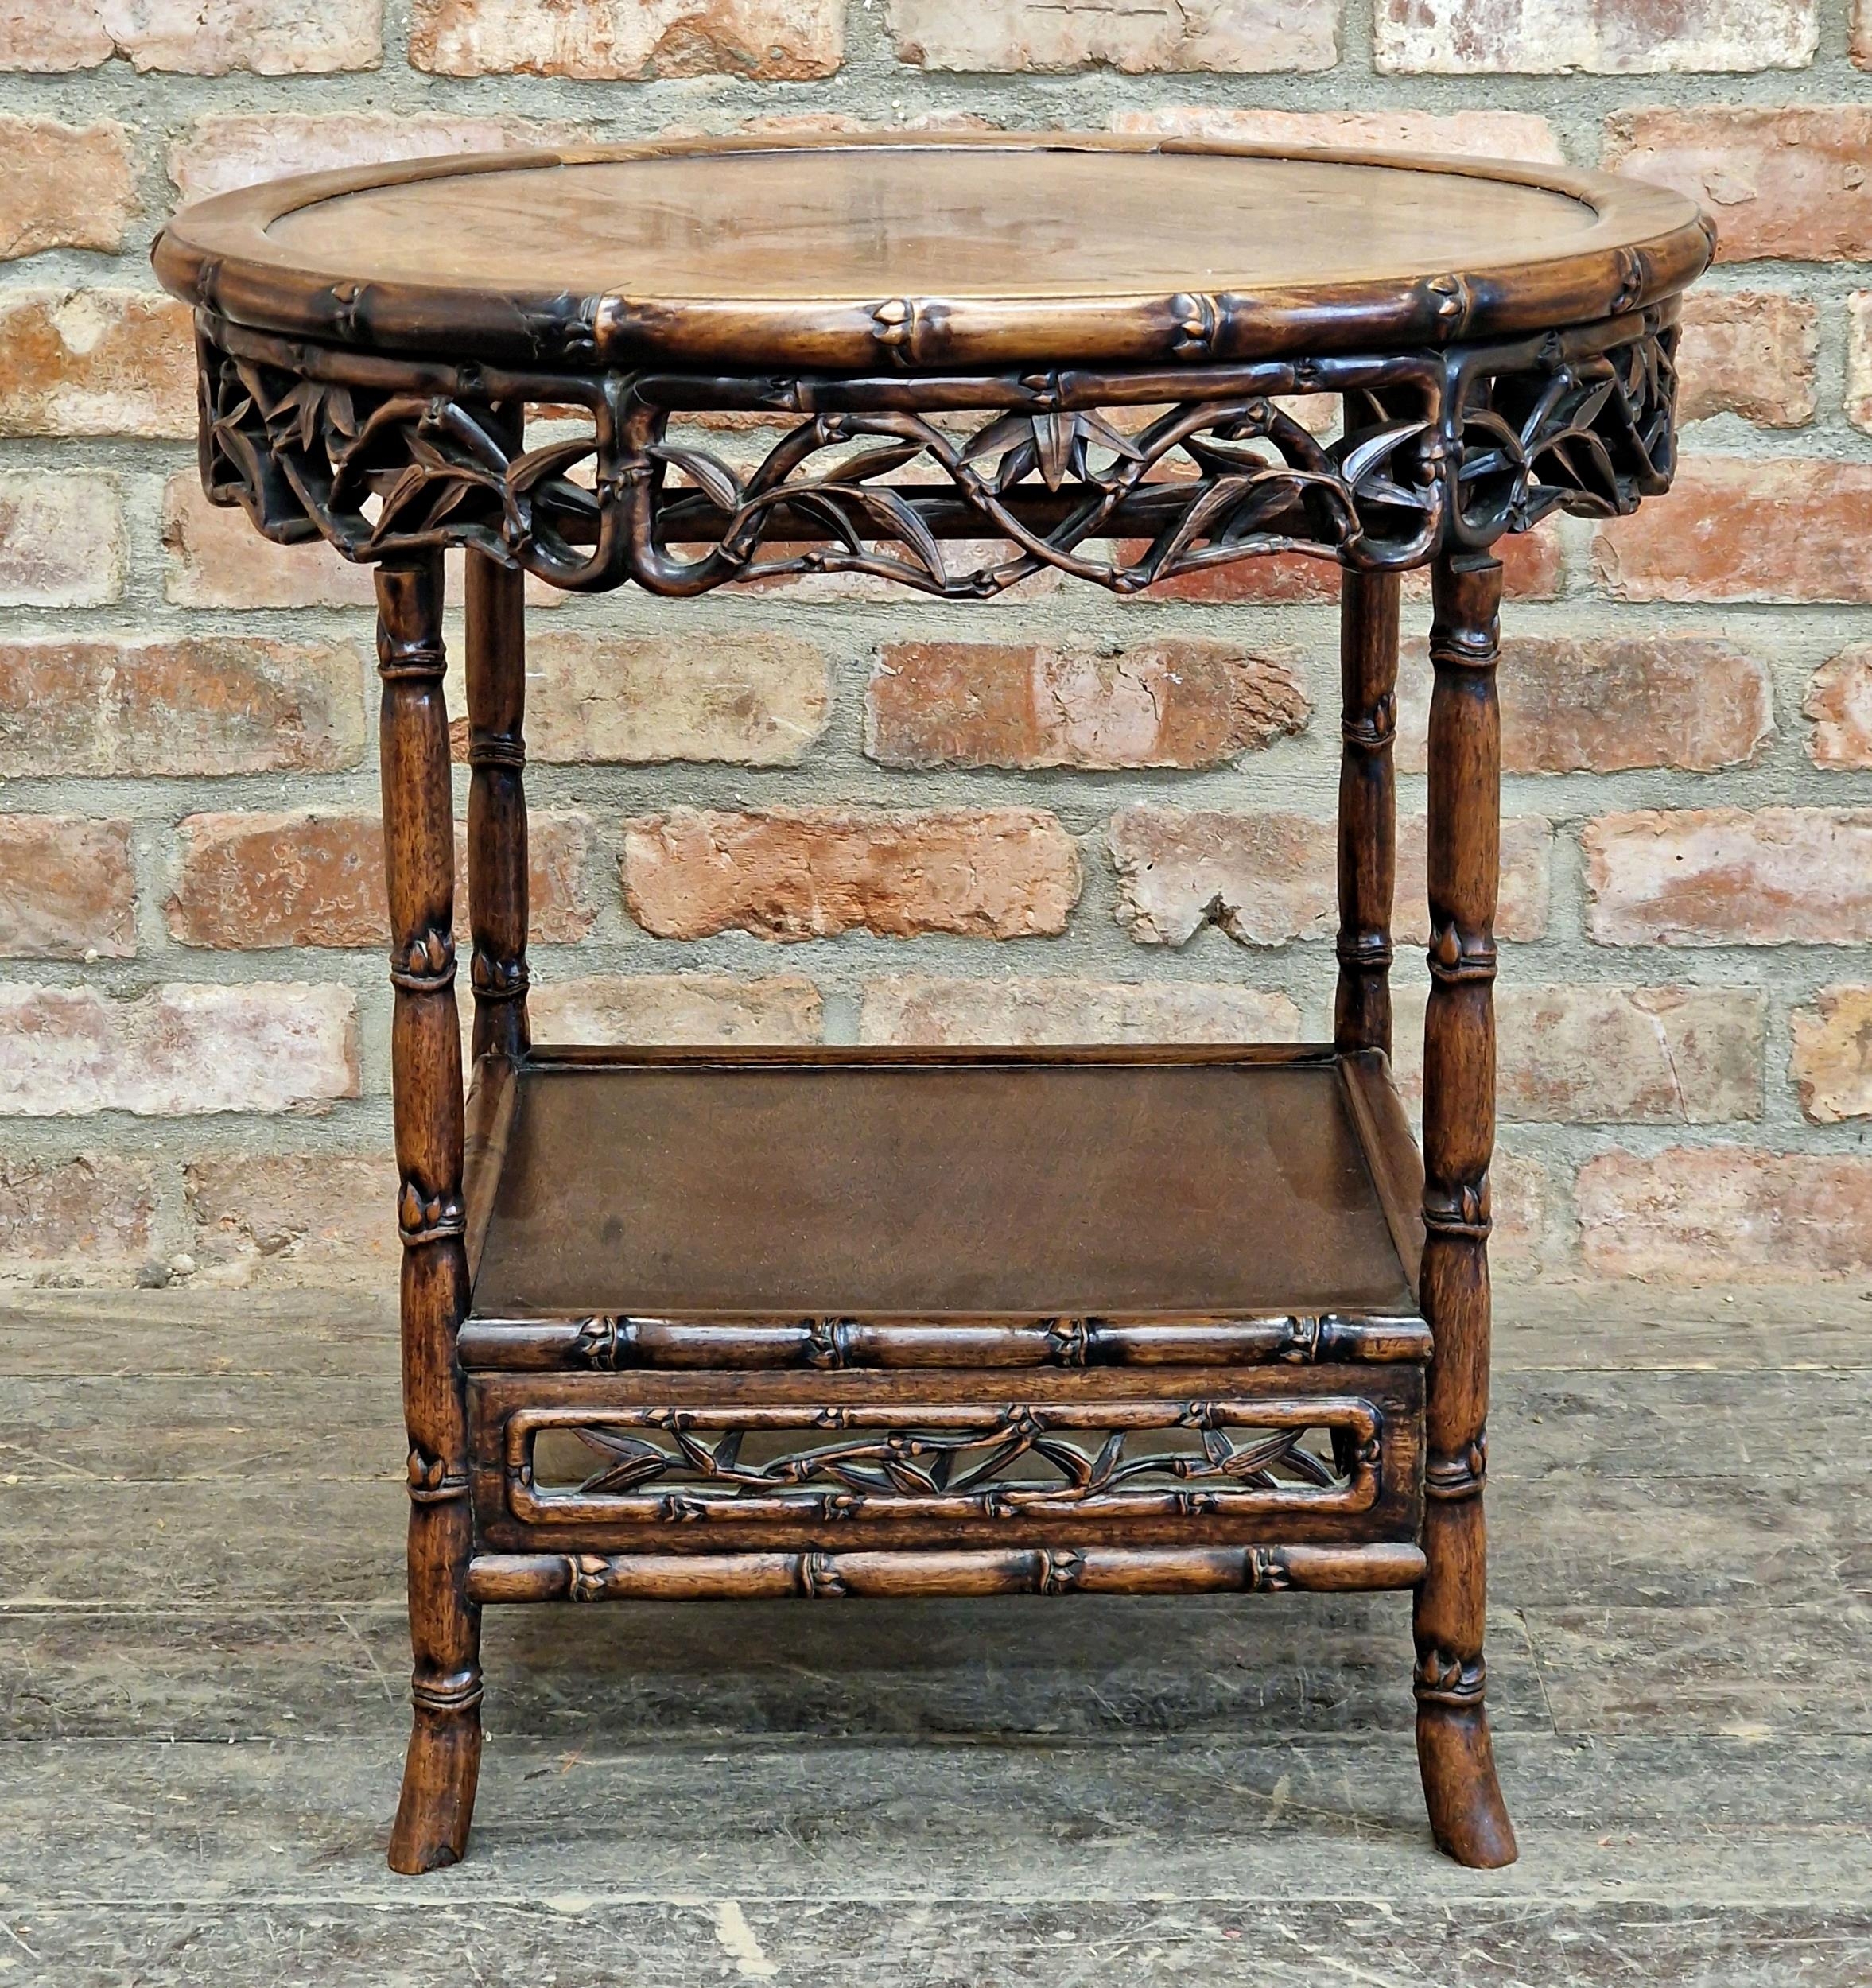 Chinese padauk wood side table with pierced decoration, H 63cm x W 63cm